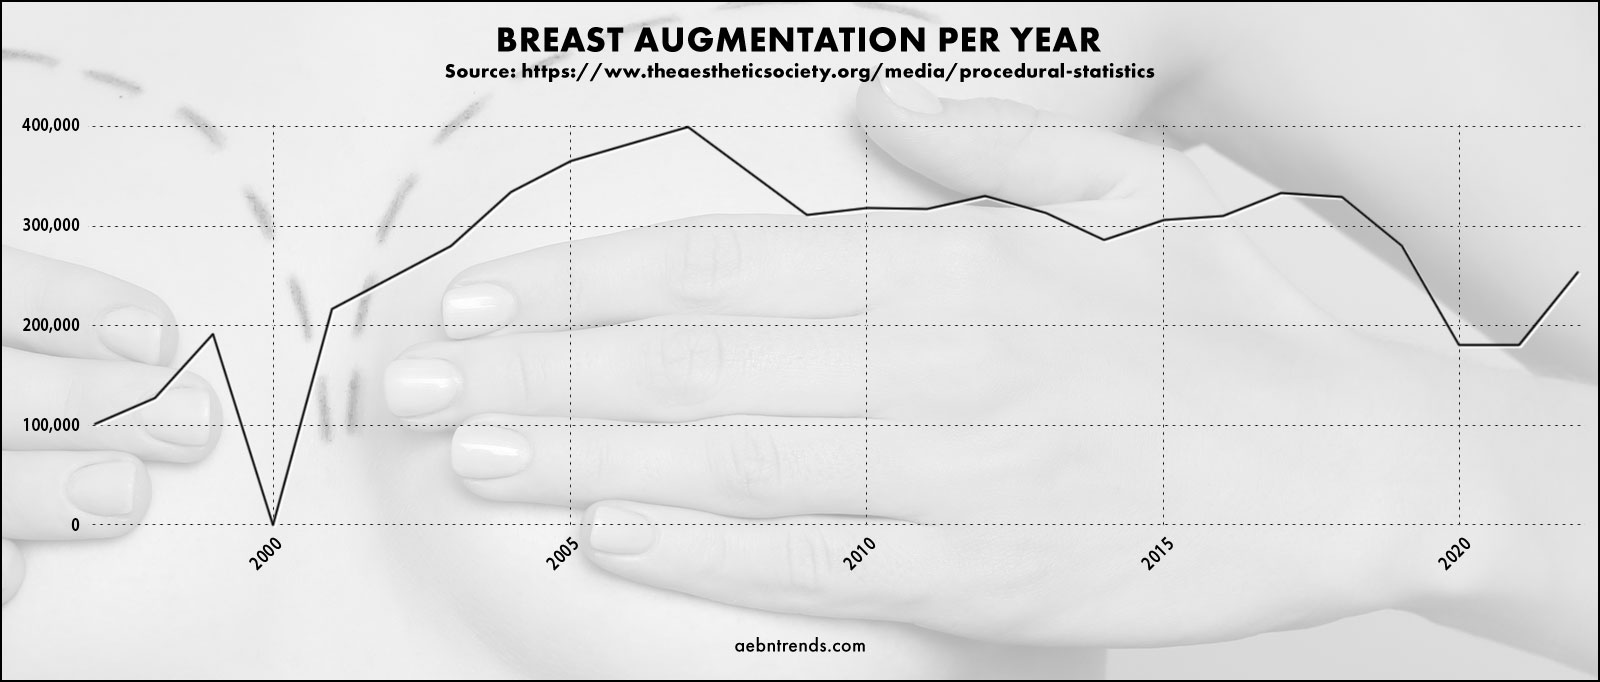 the popularity of breast augmentation was on the rise till 2007 at which point it has been on a marked decline. 